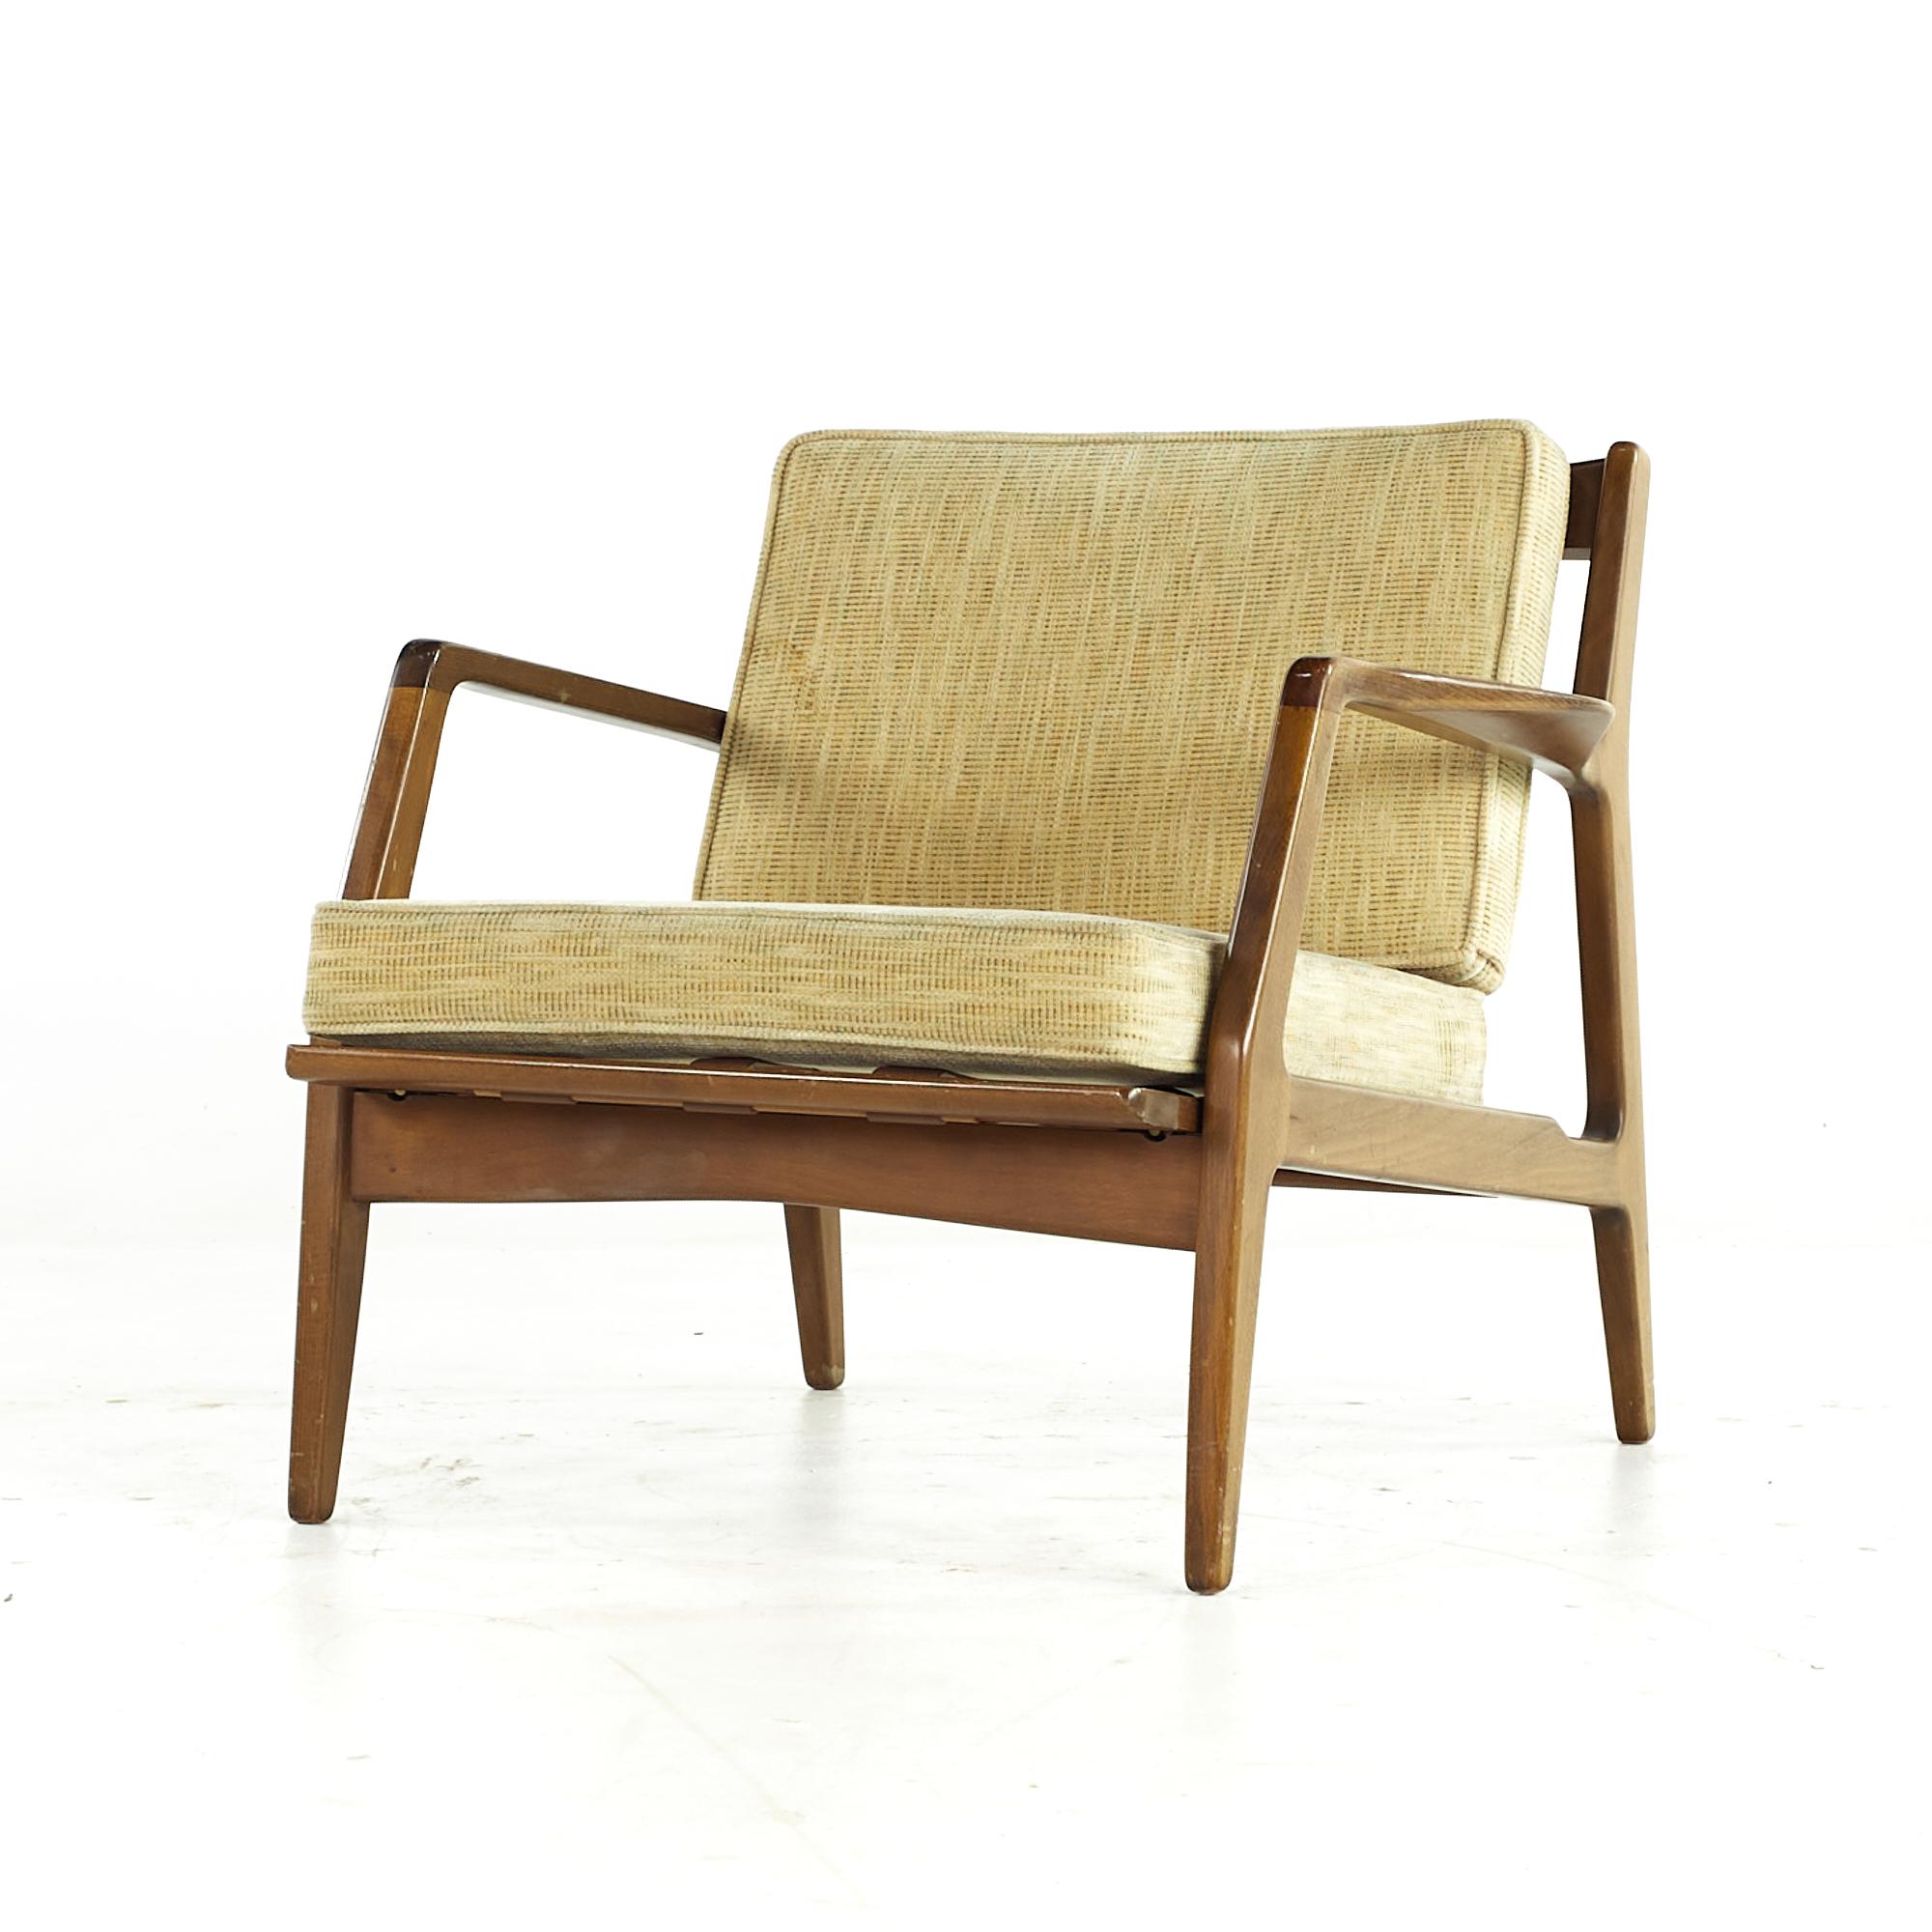 Lawrence Peabody Midcentury Walnut Lounge Chairs, Pair In Good Condition For Sale In Countryside, IL